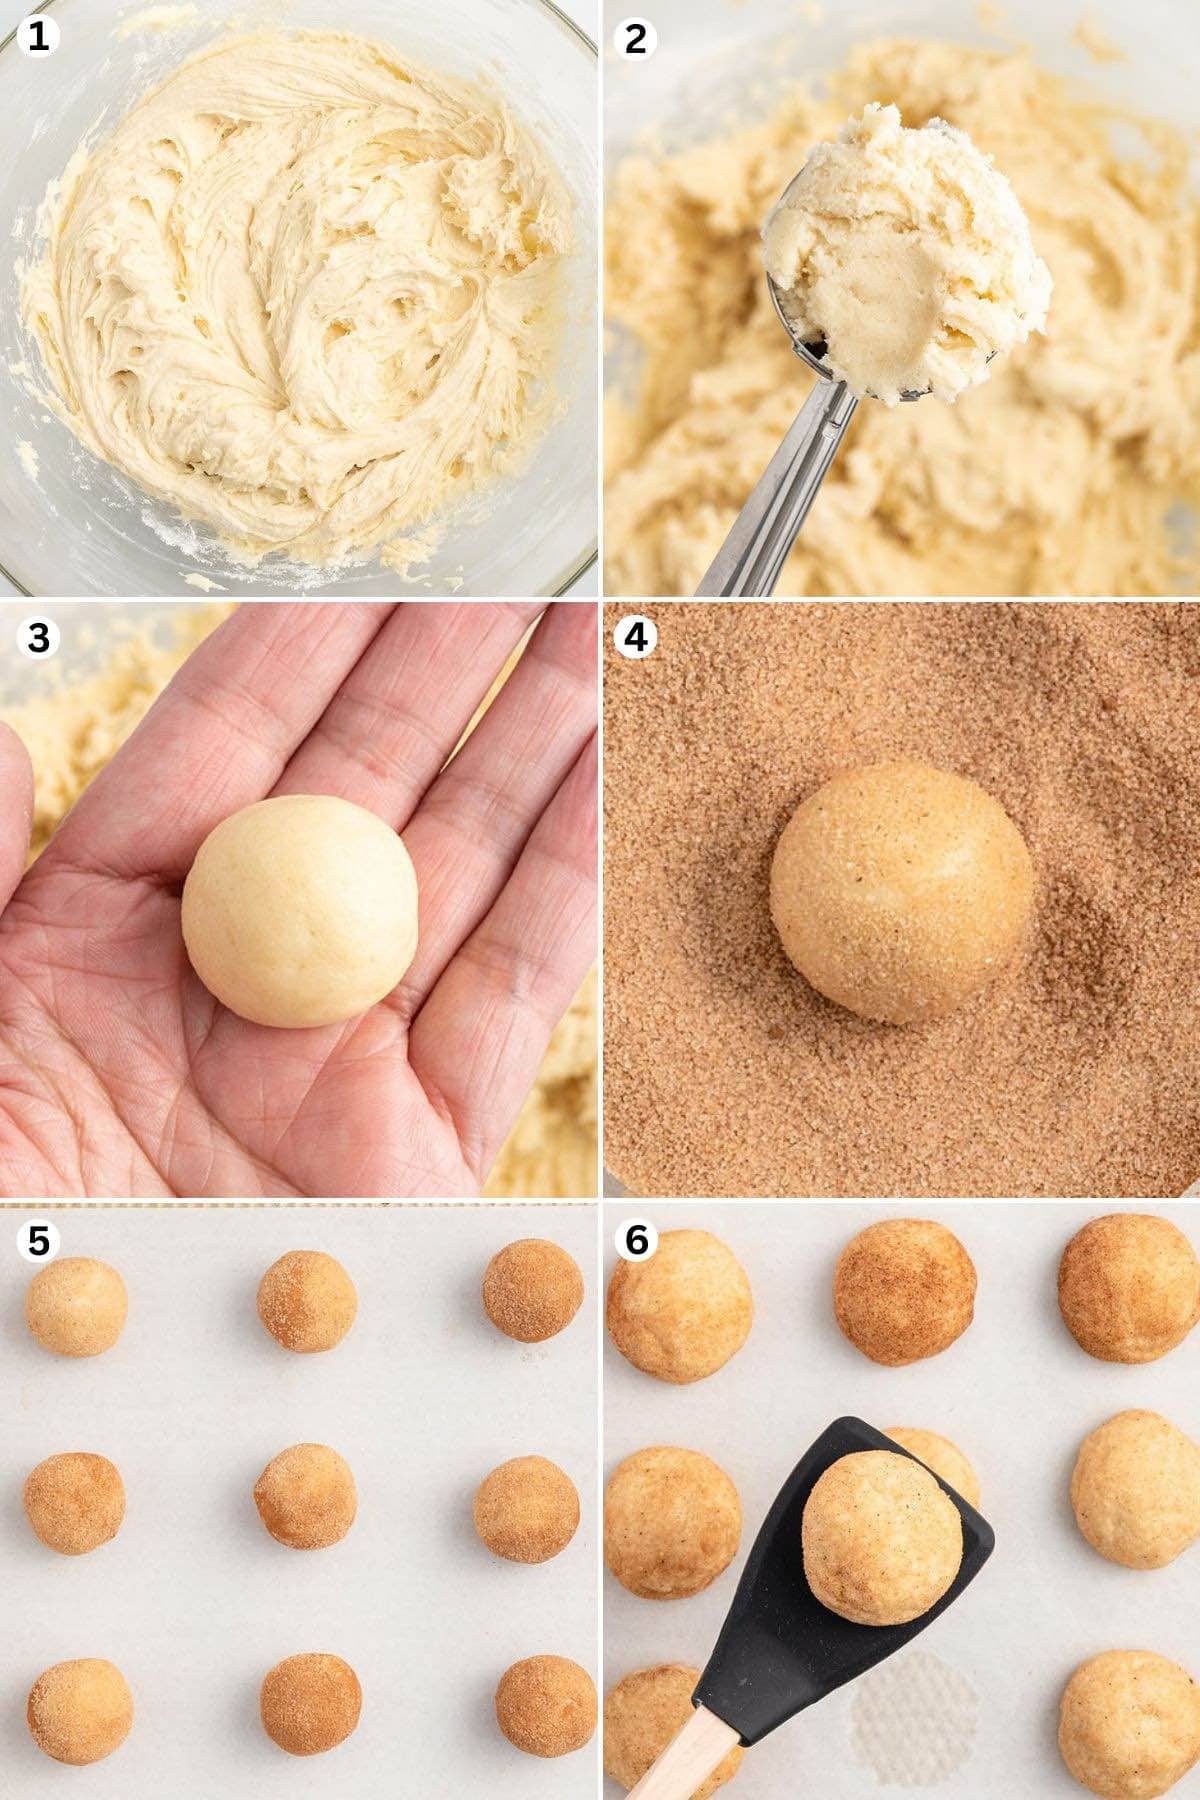 Cookie dough in mixing bowl. Scoop 1 tablespoon of the cookie dough. Roll into a ball. Roll the ball in the cinnamon sugar. Place them on the baking sheet and bake.